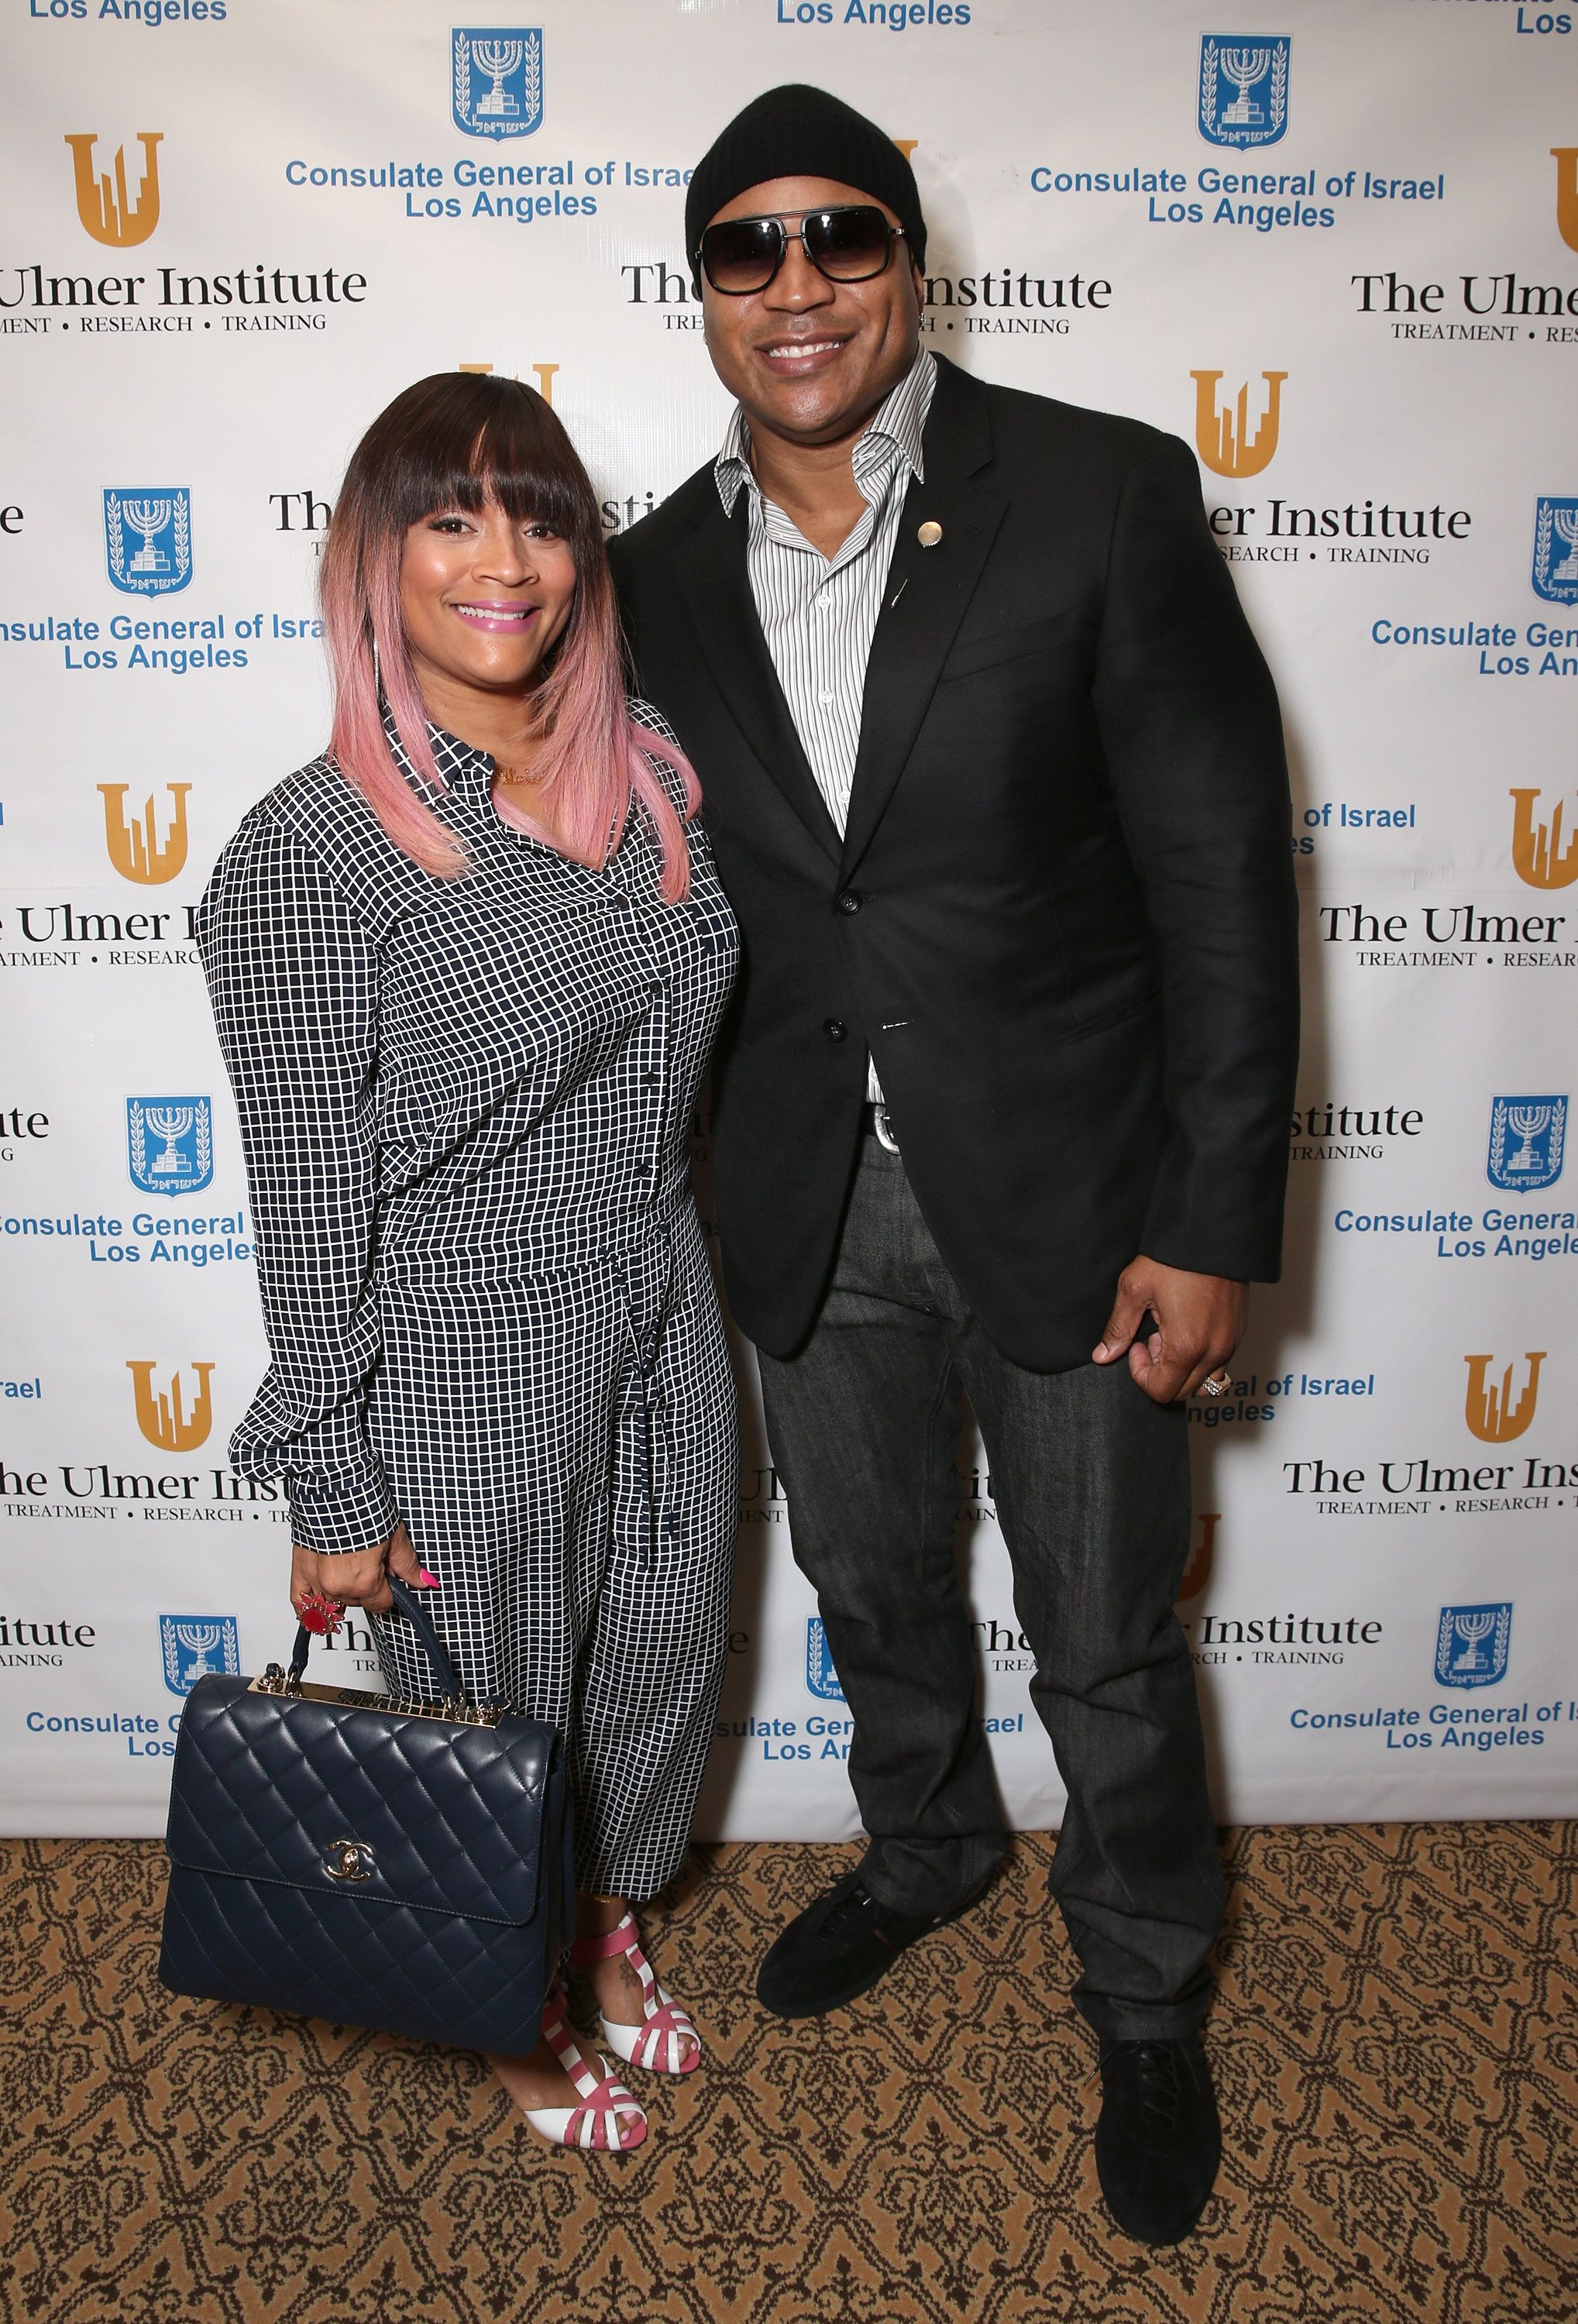 Simone Smith and LL Cool J during the Ulmer Institute Launch Celebration at Montage Beverly Hills on May 18, 2016 in Beverly Hills, California. | Source: Getty Images